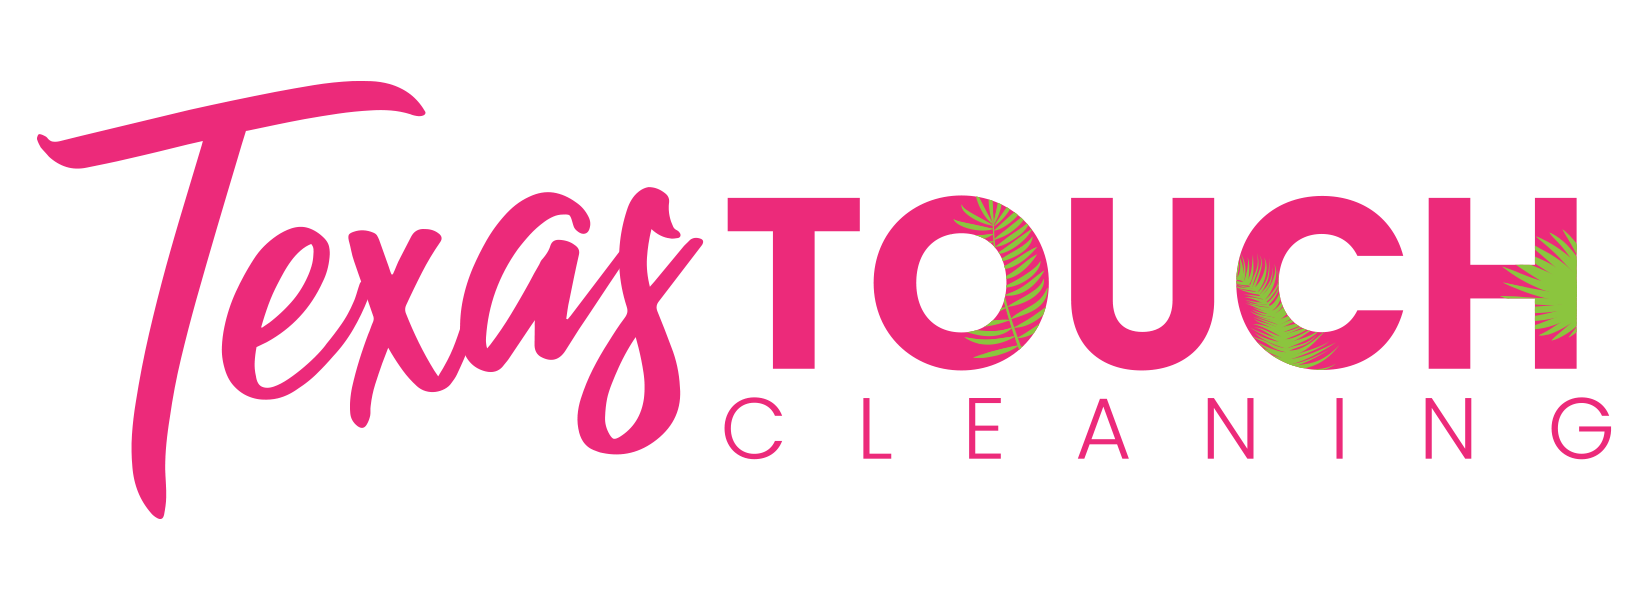 Texas Touch Cleaning – Residential & Commercial Cleaning Services